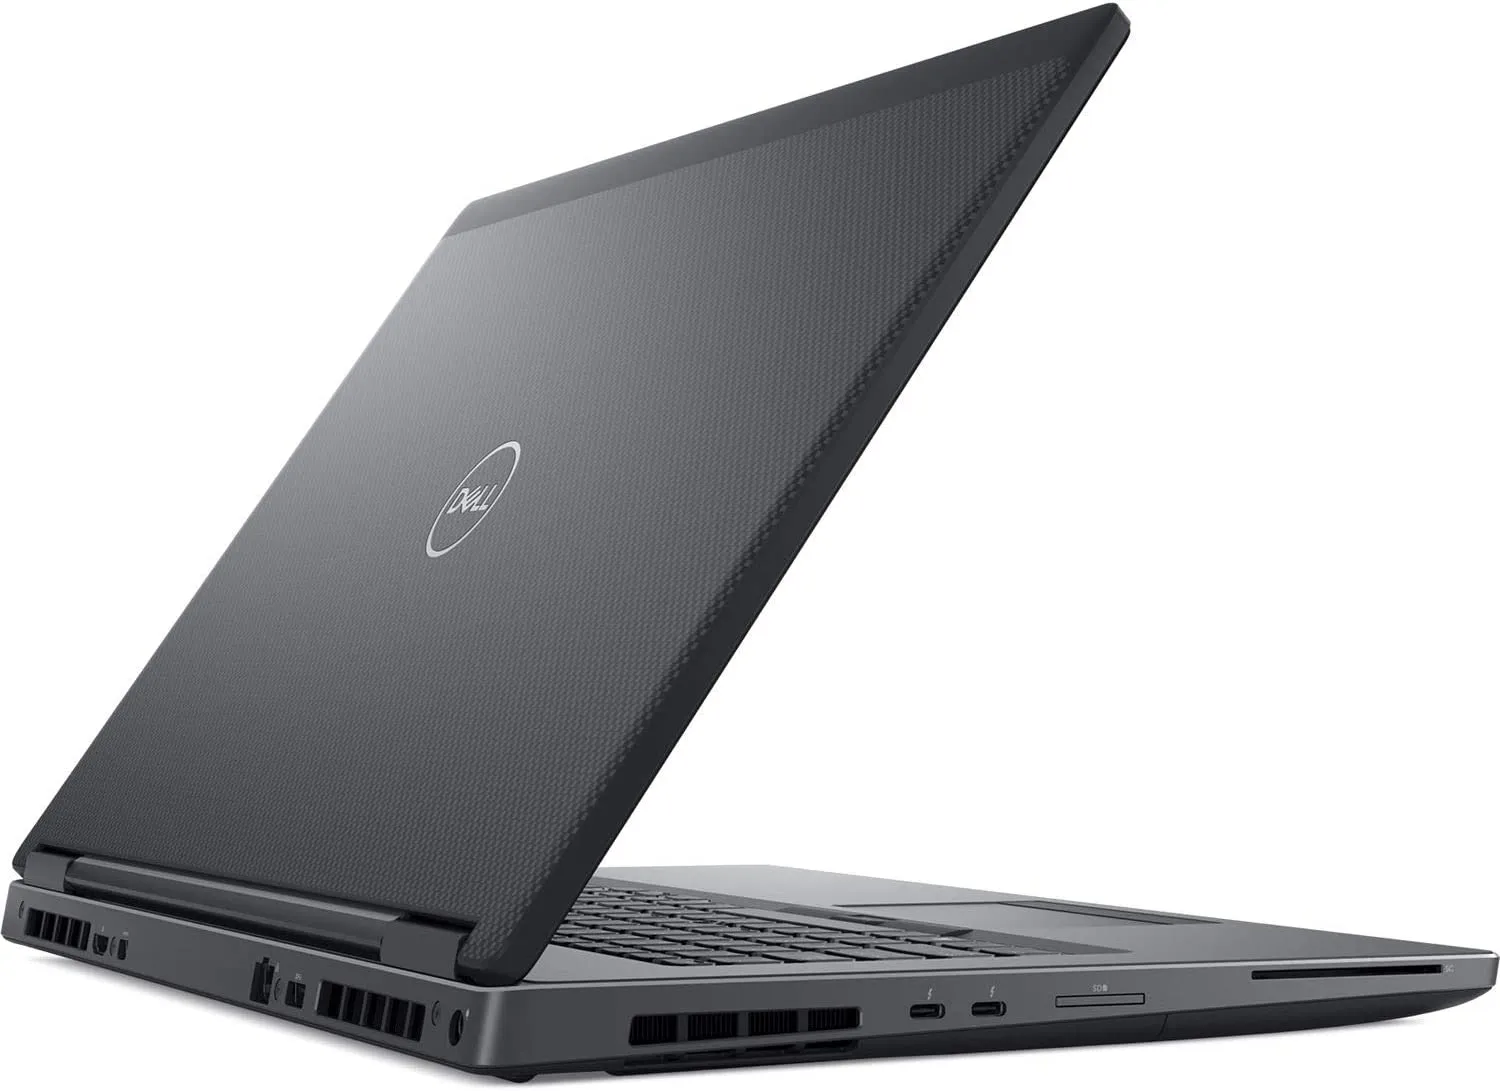 Dell Precision 7730 1920 X 1080 17.3" LCD Mobile Workstation with Intel Core i7-8850H Hexa-core 2.6 GHz, 16GB RAM, 512GB SSD